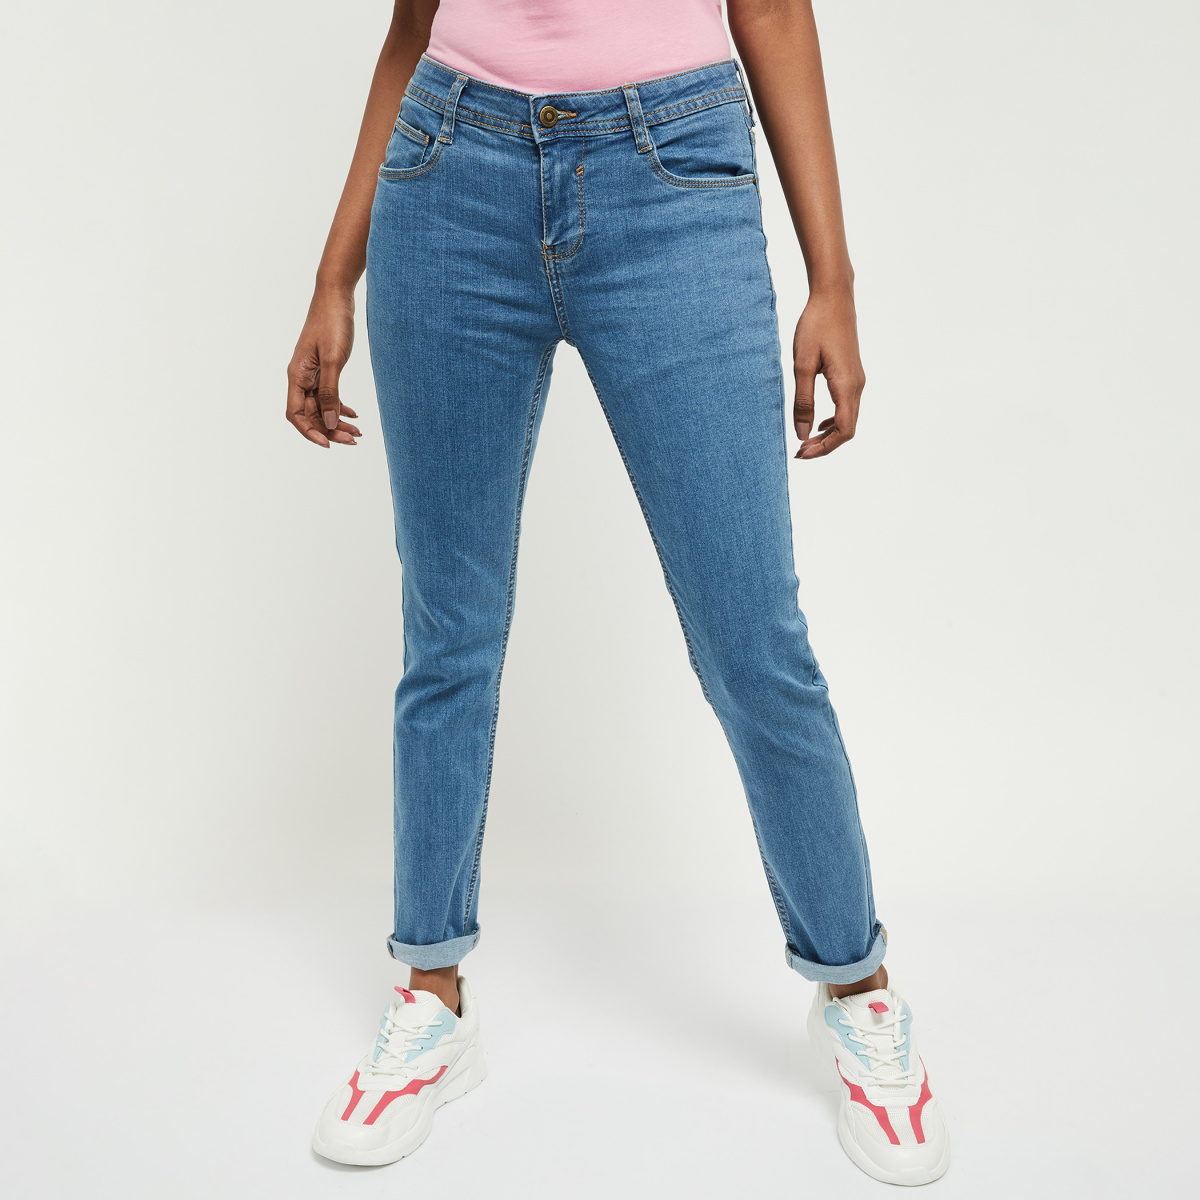 MAX Light-Washed Pencil Fit Jeans